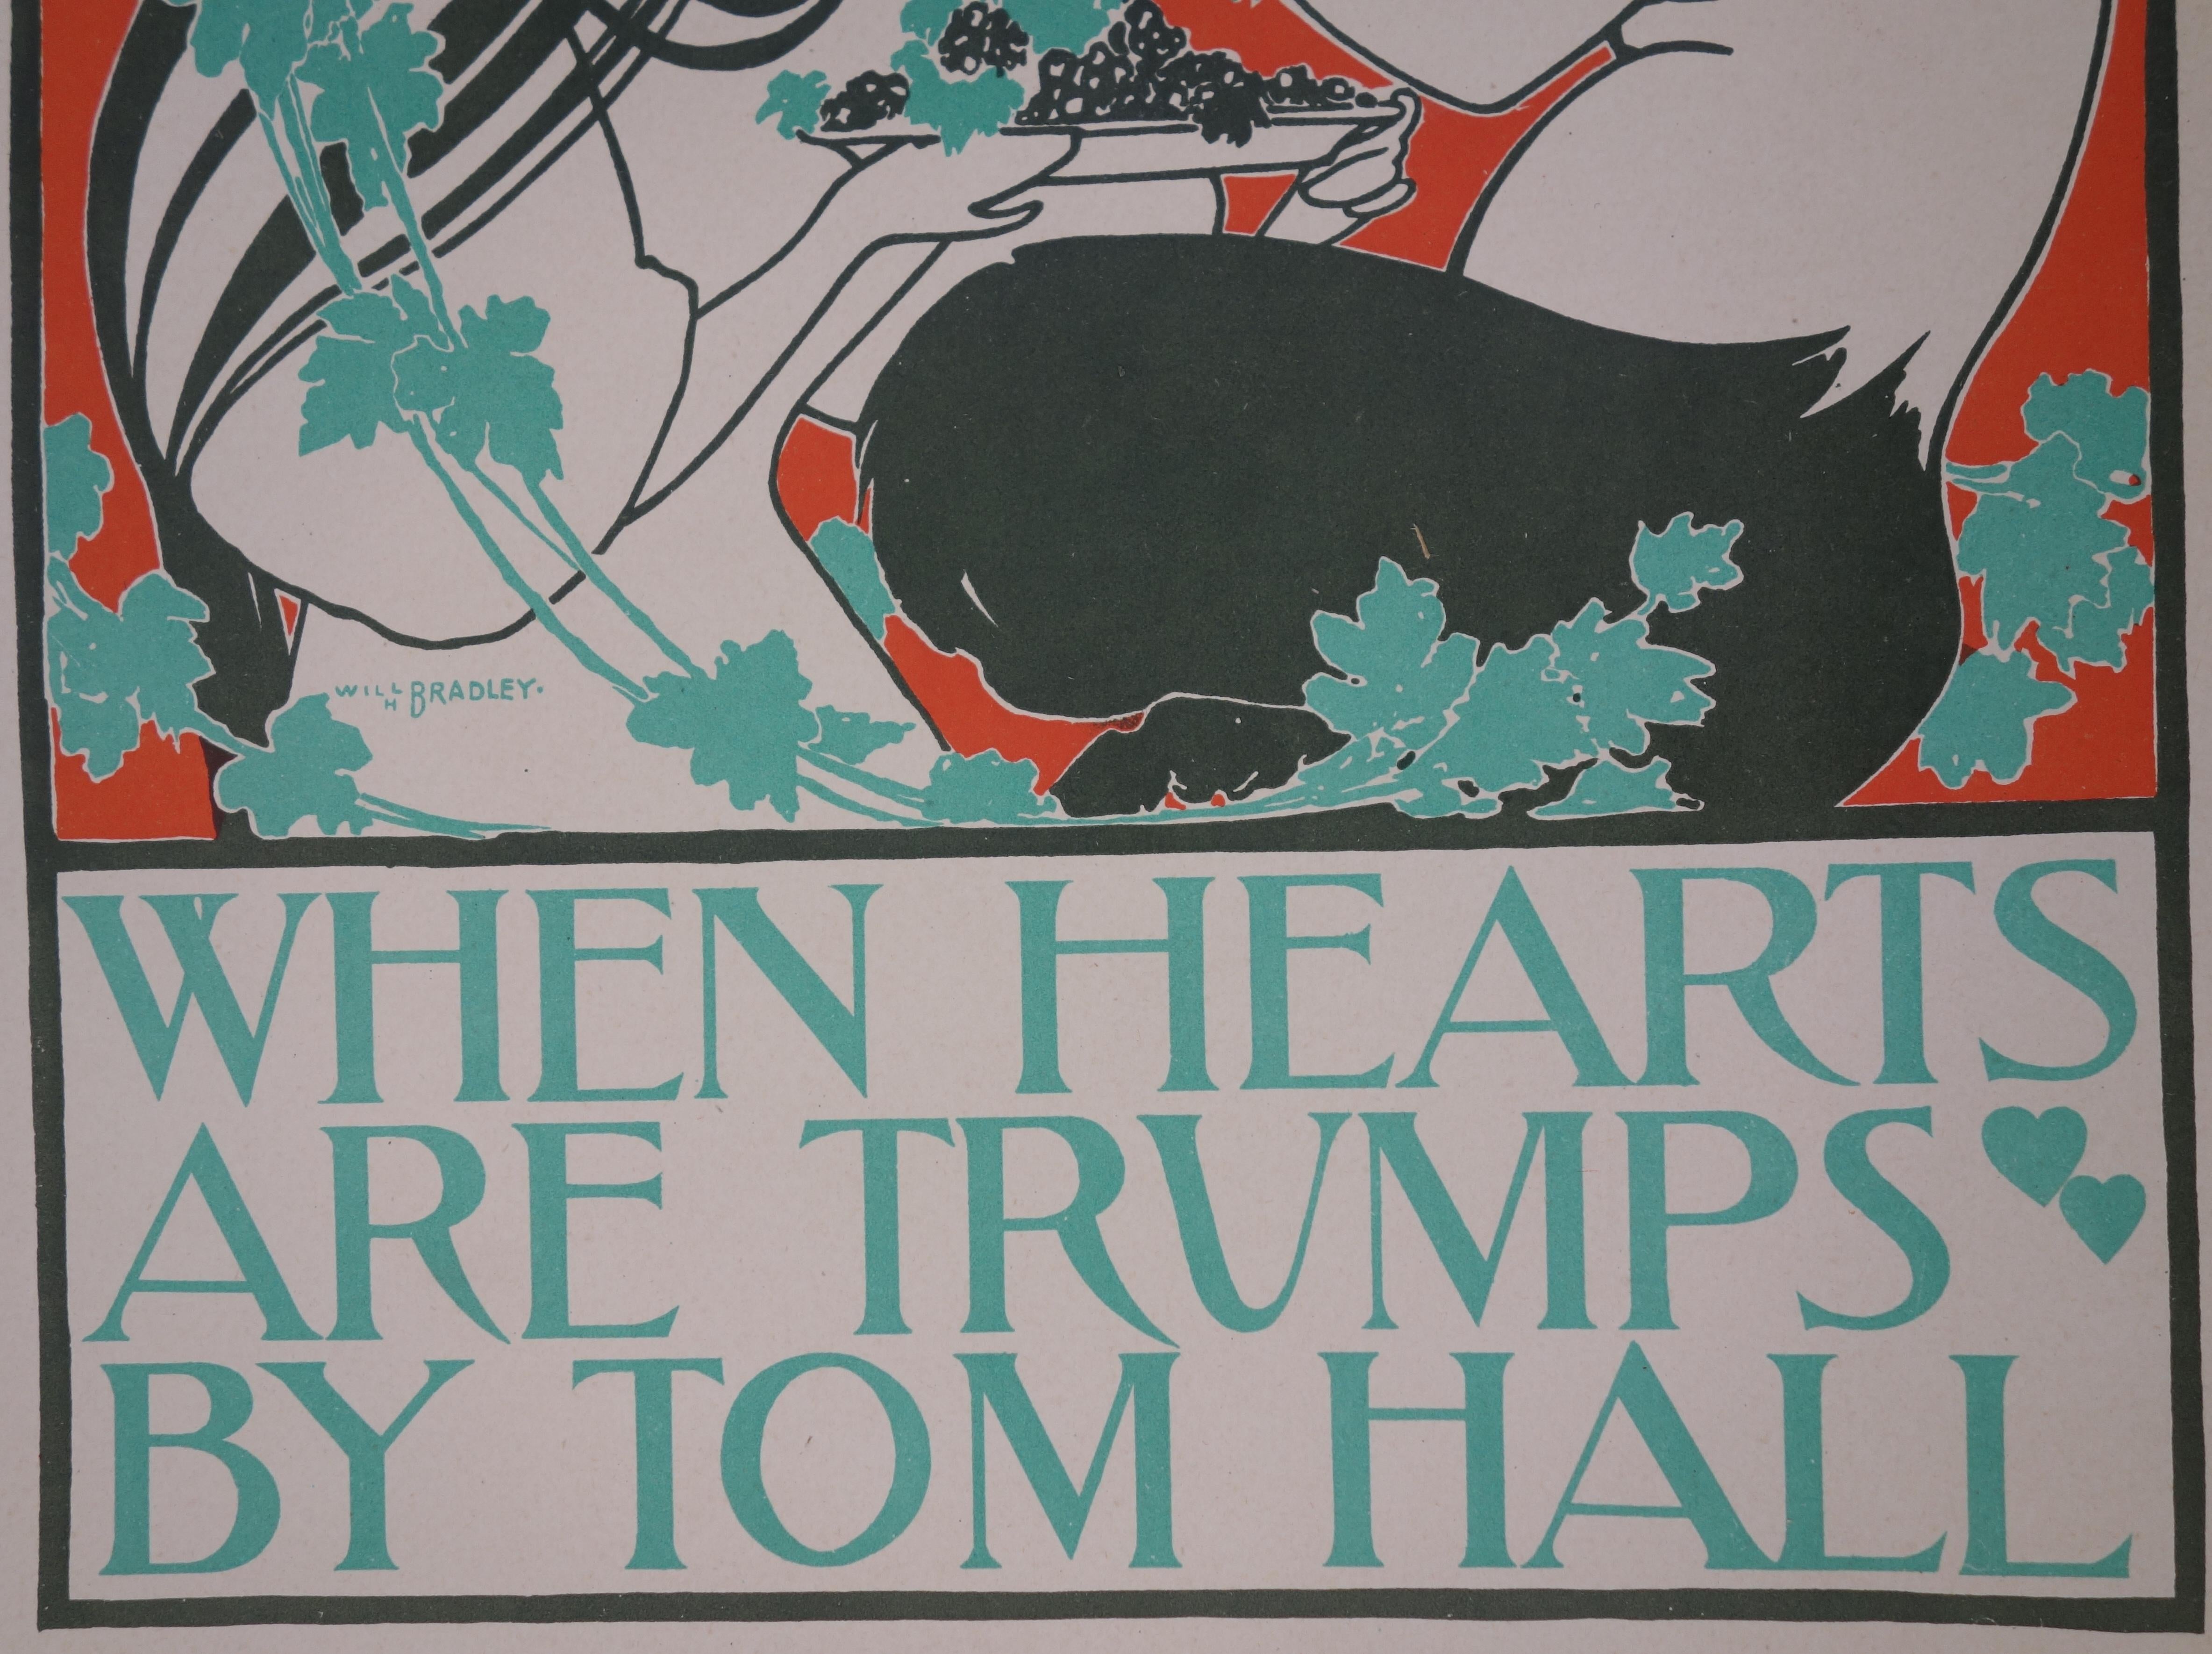 Will Bradley
When hearts are trumps, 1896

Original lithograph
Printed signature in the plate
Printed on paper vélin 
Size 40 x 29 cm (c. 15.7 x 11.4